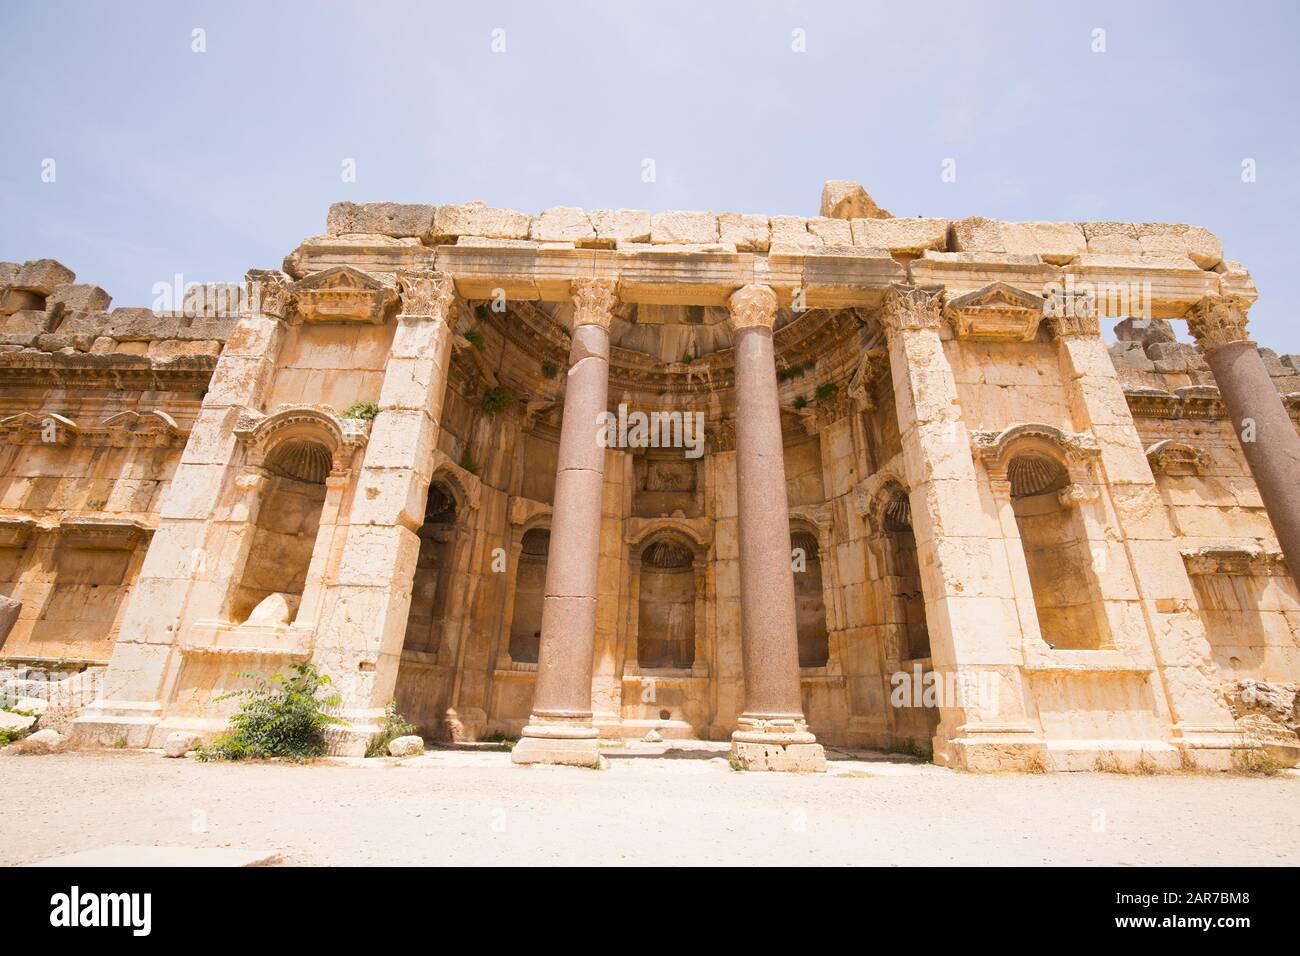 Portico. The Great Court. The ruins of the Roman city of Heliopolis or Baalbek in the Beqaa Valley. Baalbek, Lebanon - June, 2019 Stock Photo